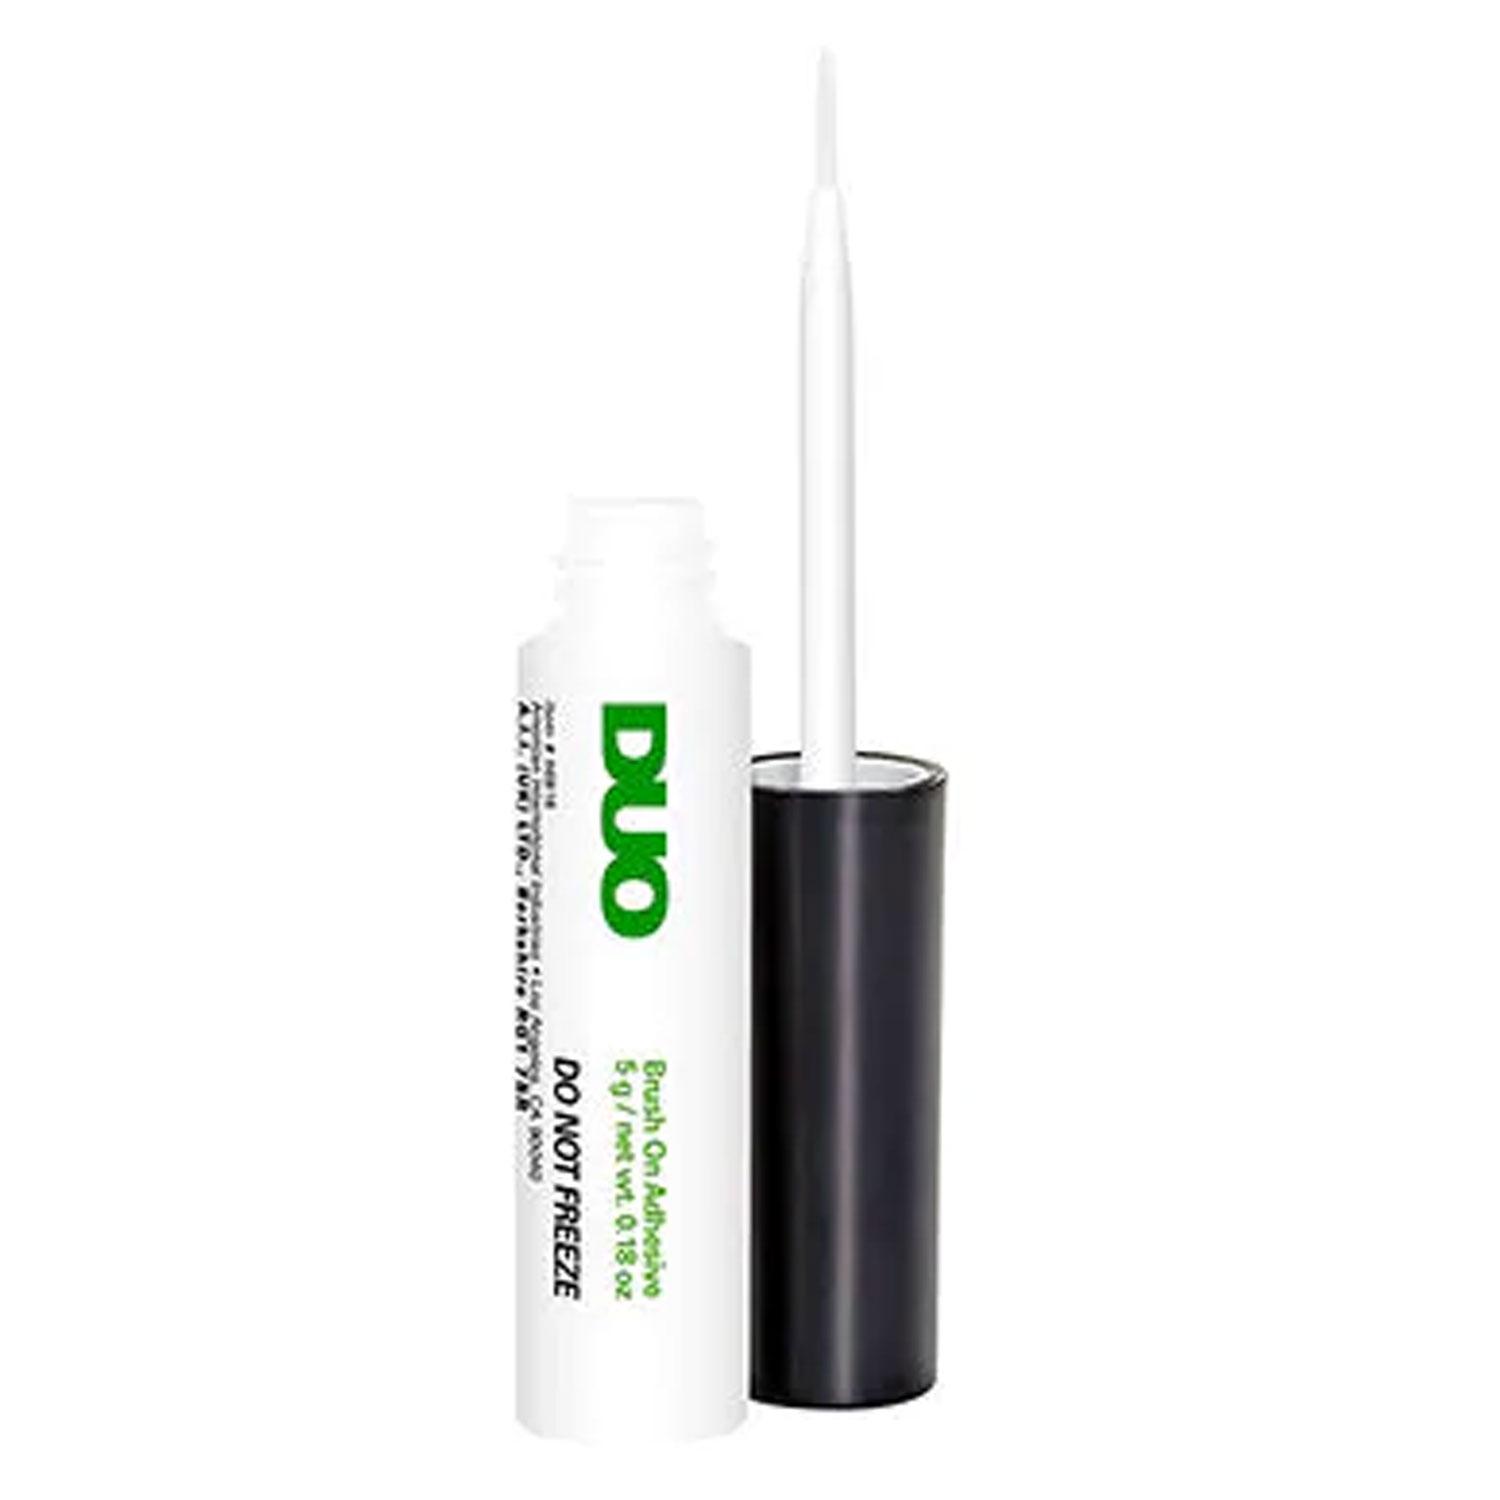 DUO - Brush-On Non-Latex Adhesive White/Clear